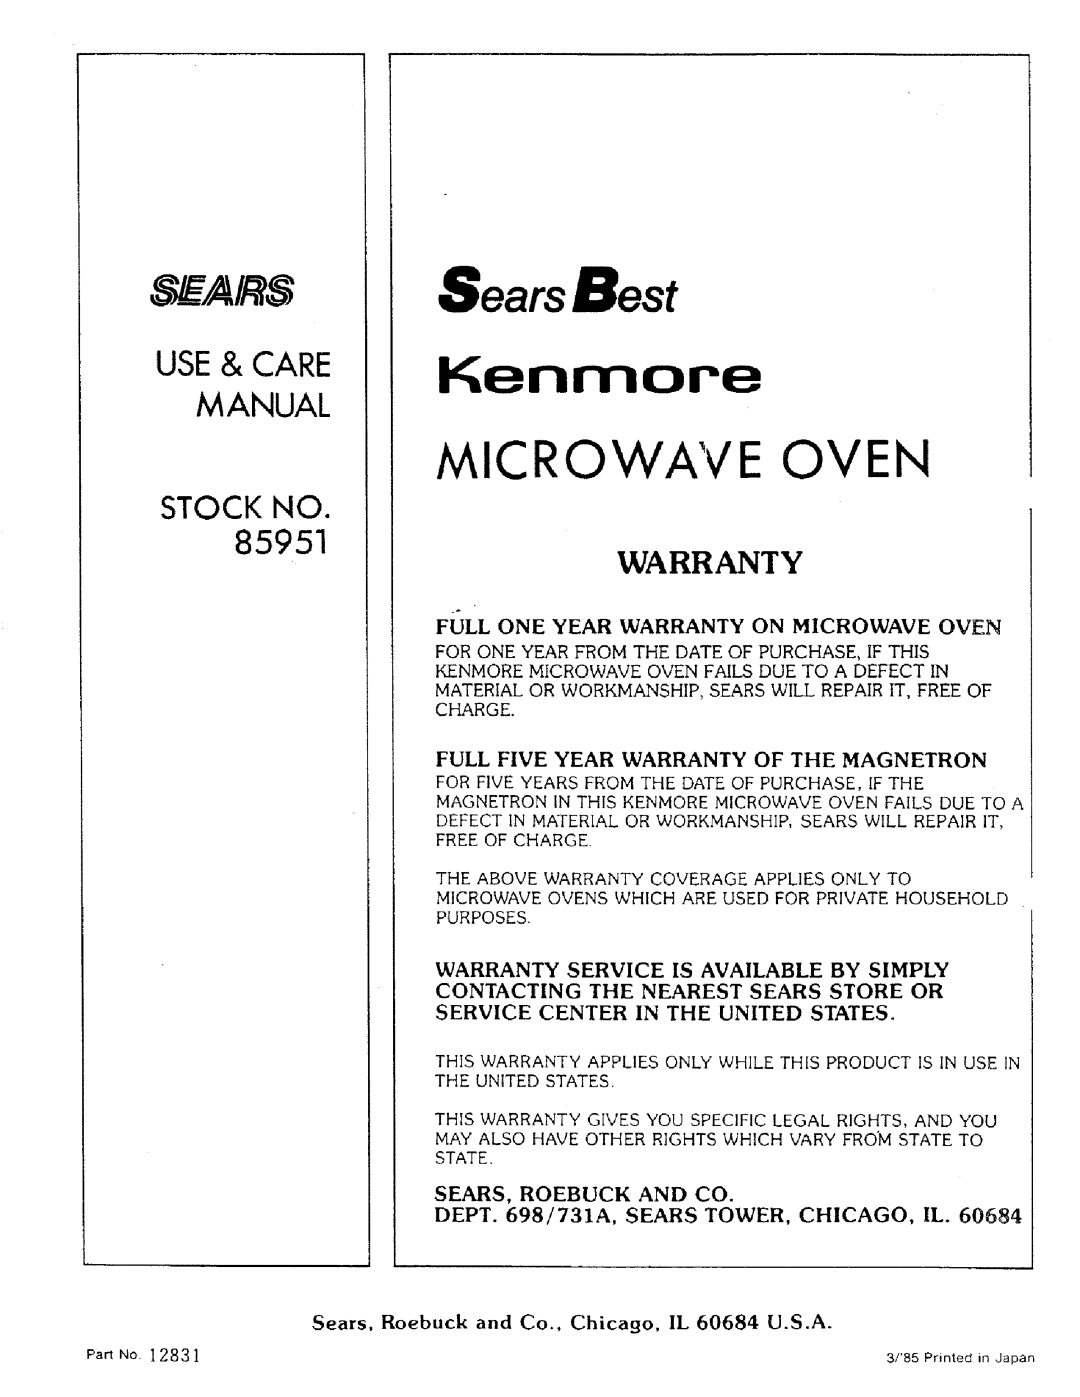 Sears 85951 manual Microwave Oven, Warranty, SearsBest, Kenmore, Use& Care Manual Stock No 